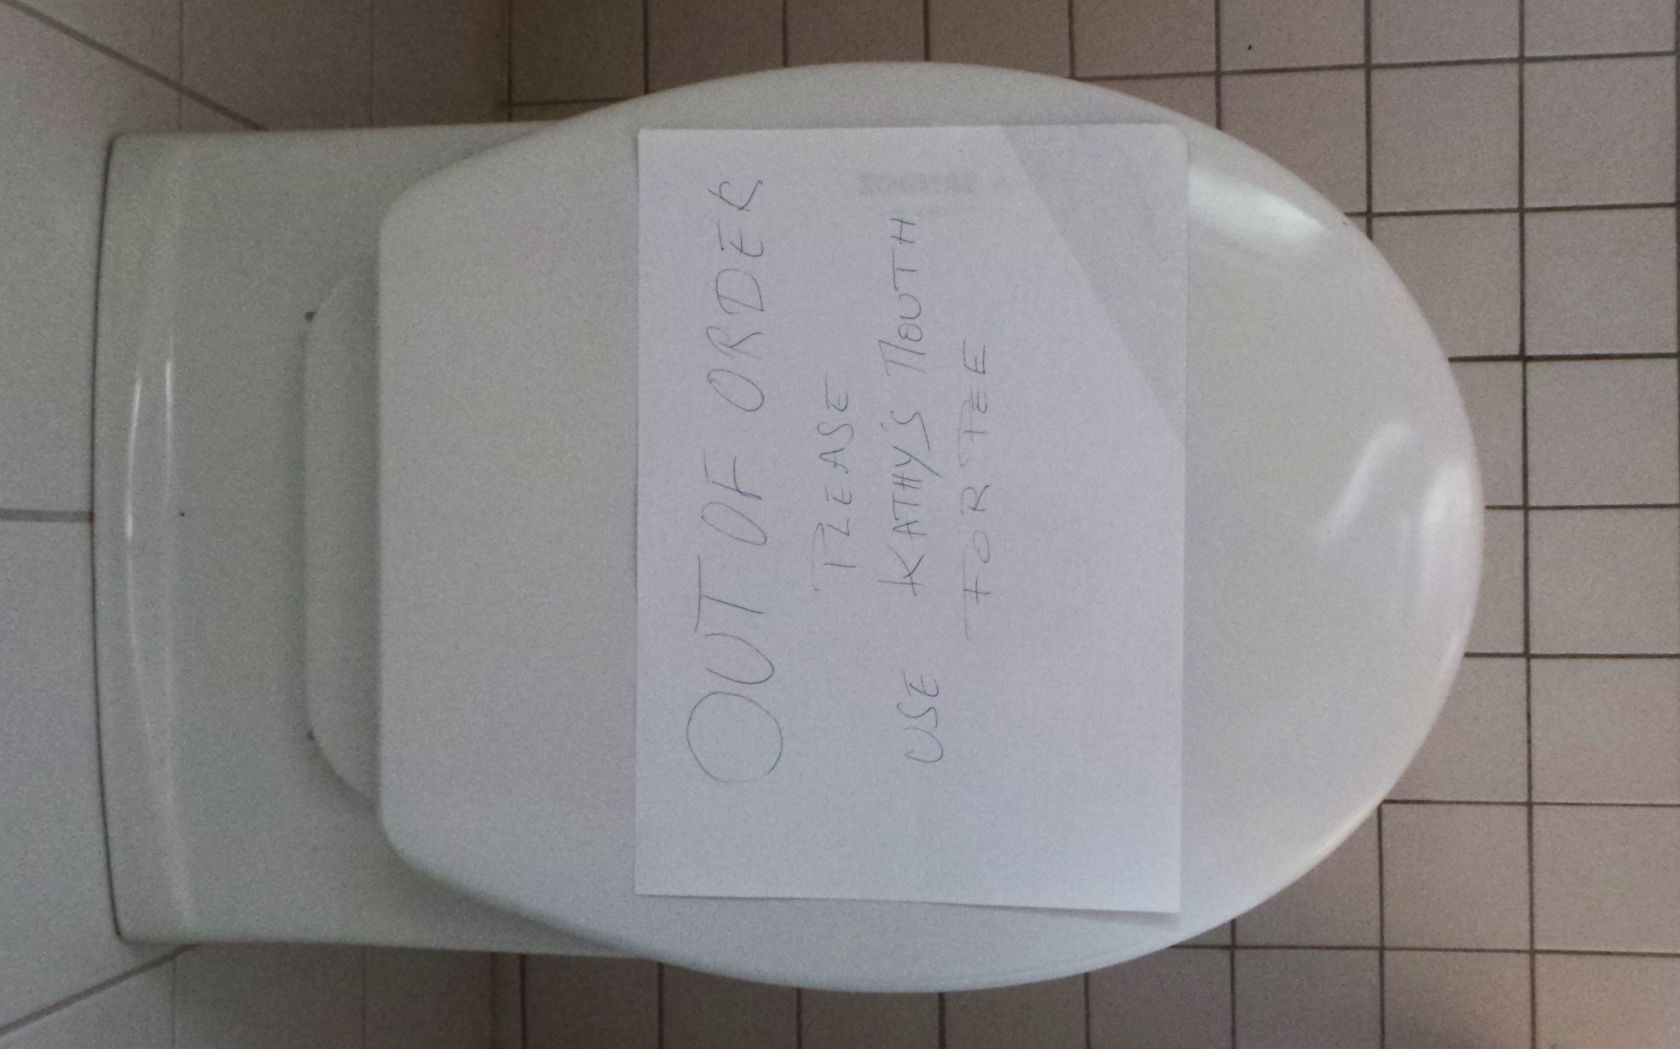 Toilet Out of order